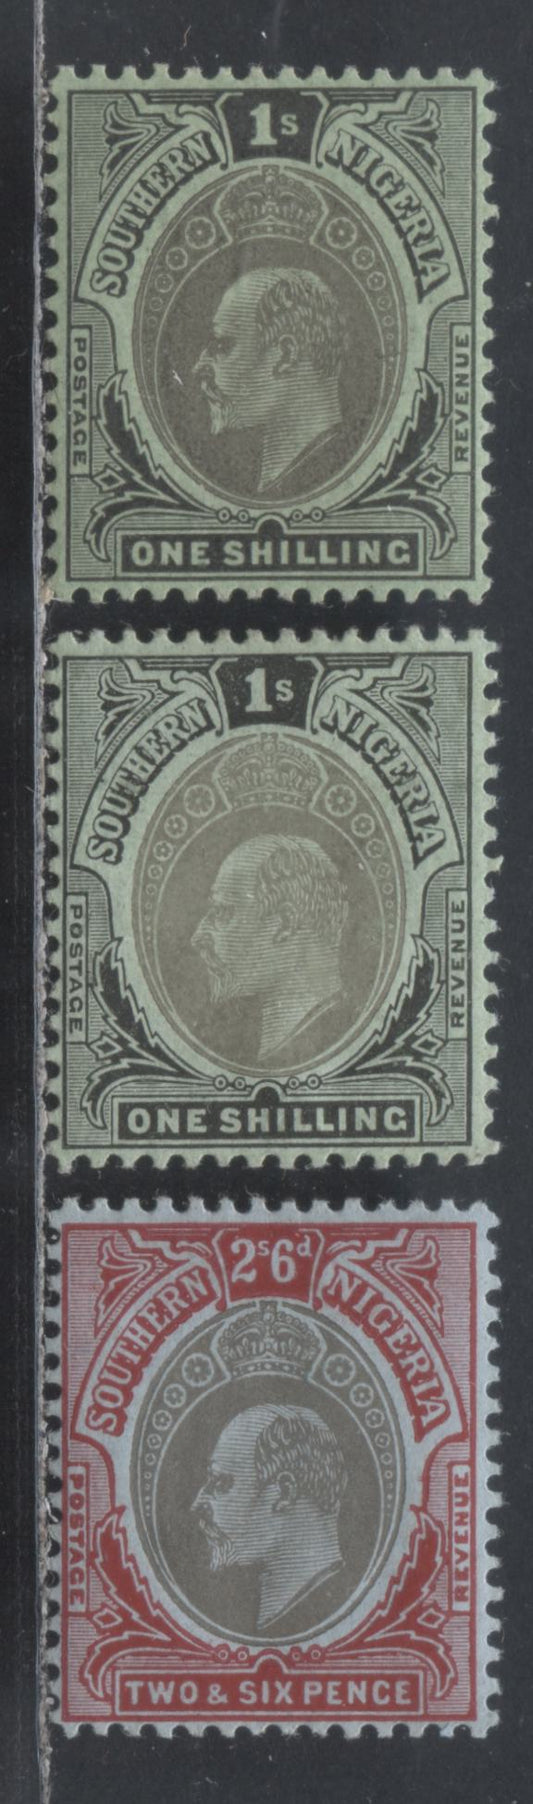 Lot 98 Southern Nigeria SC#39-40 1907-1910 Universal Color Edward VII Keyplate Issue, Multiple Crown CA Wmk, 3 F/VFOG Singles, Click on Listing to See ALL Pictures, 2022 Scott Classic Cat. $35 USD